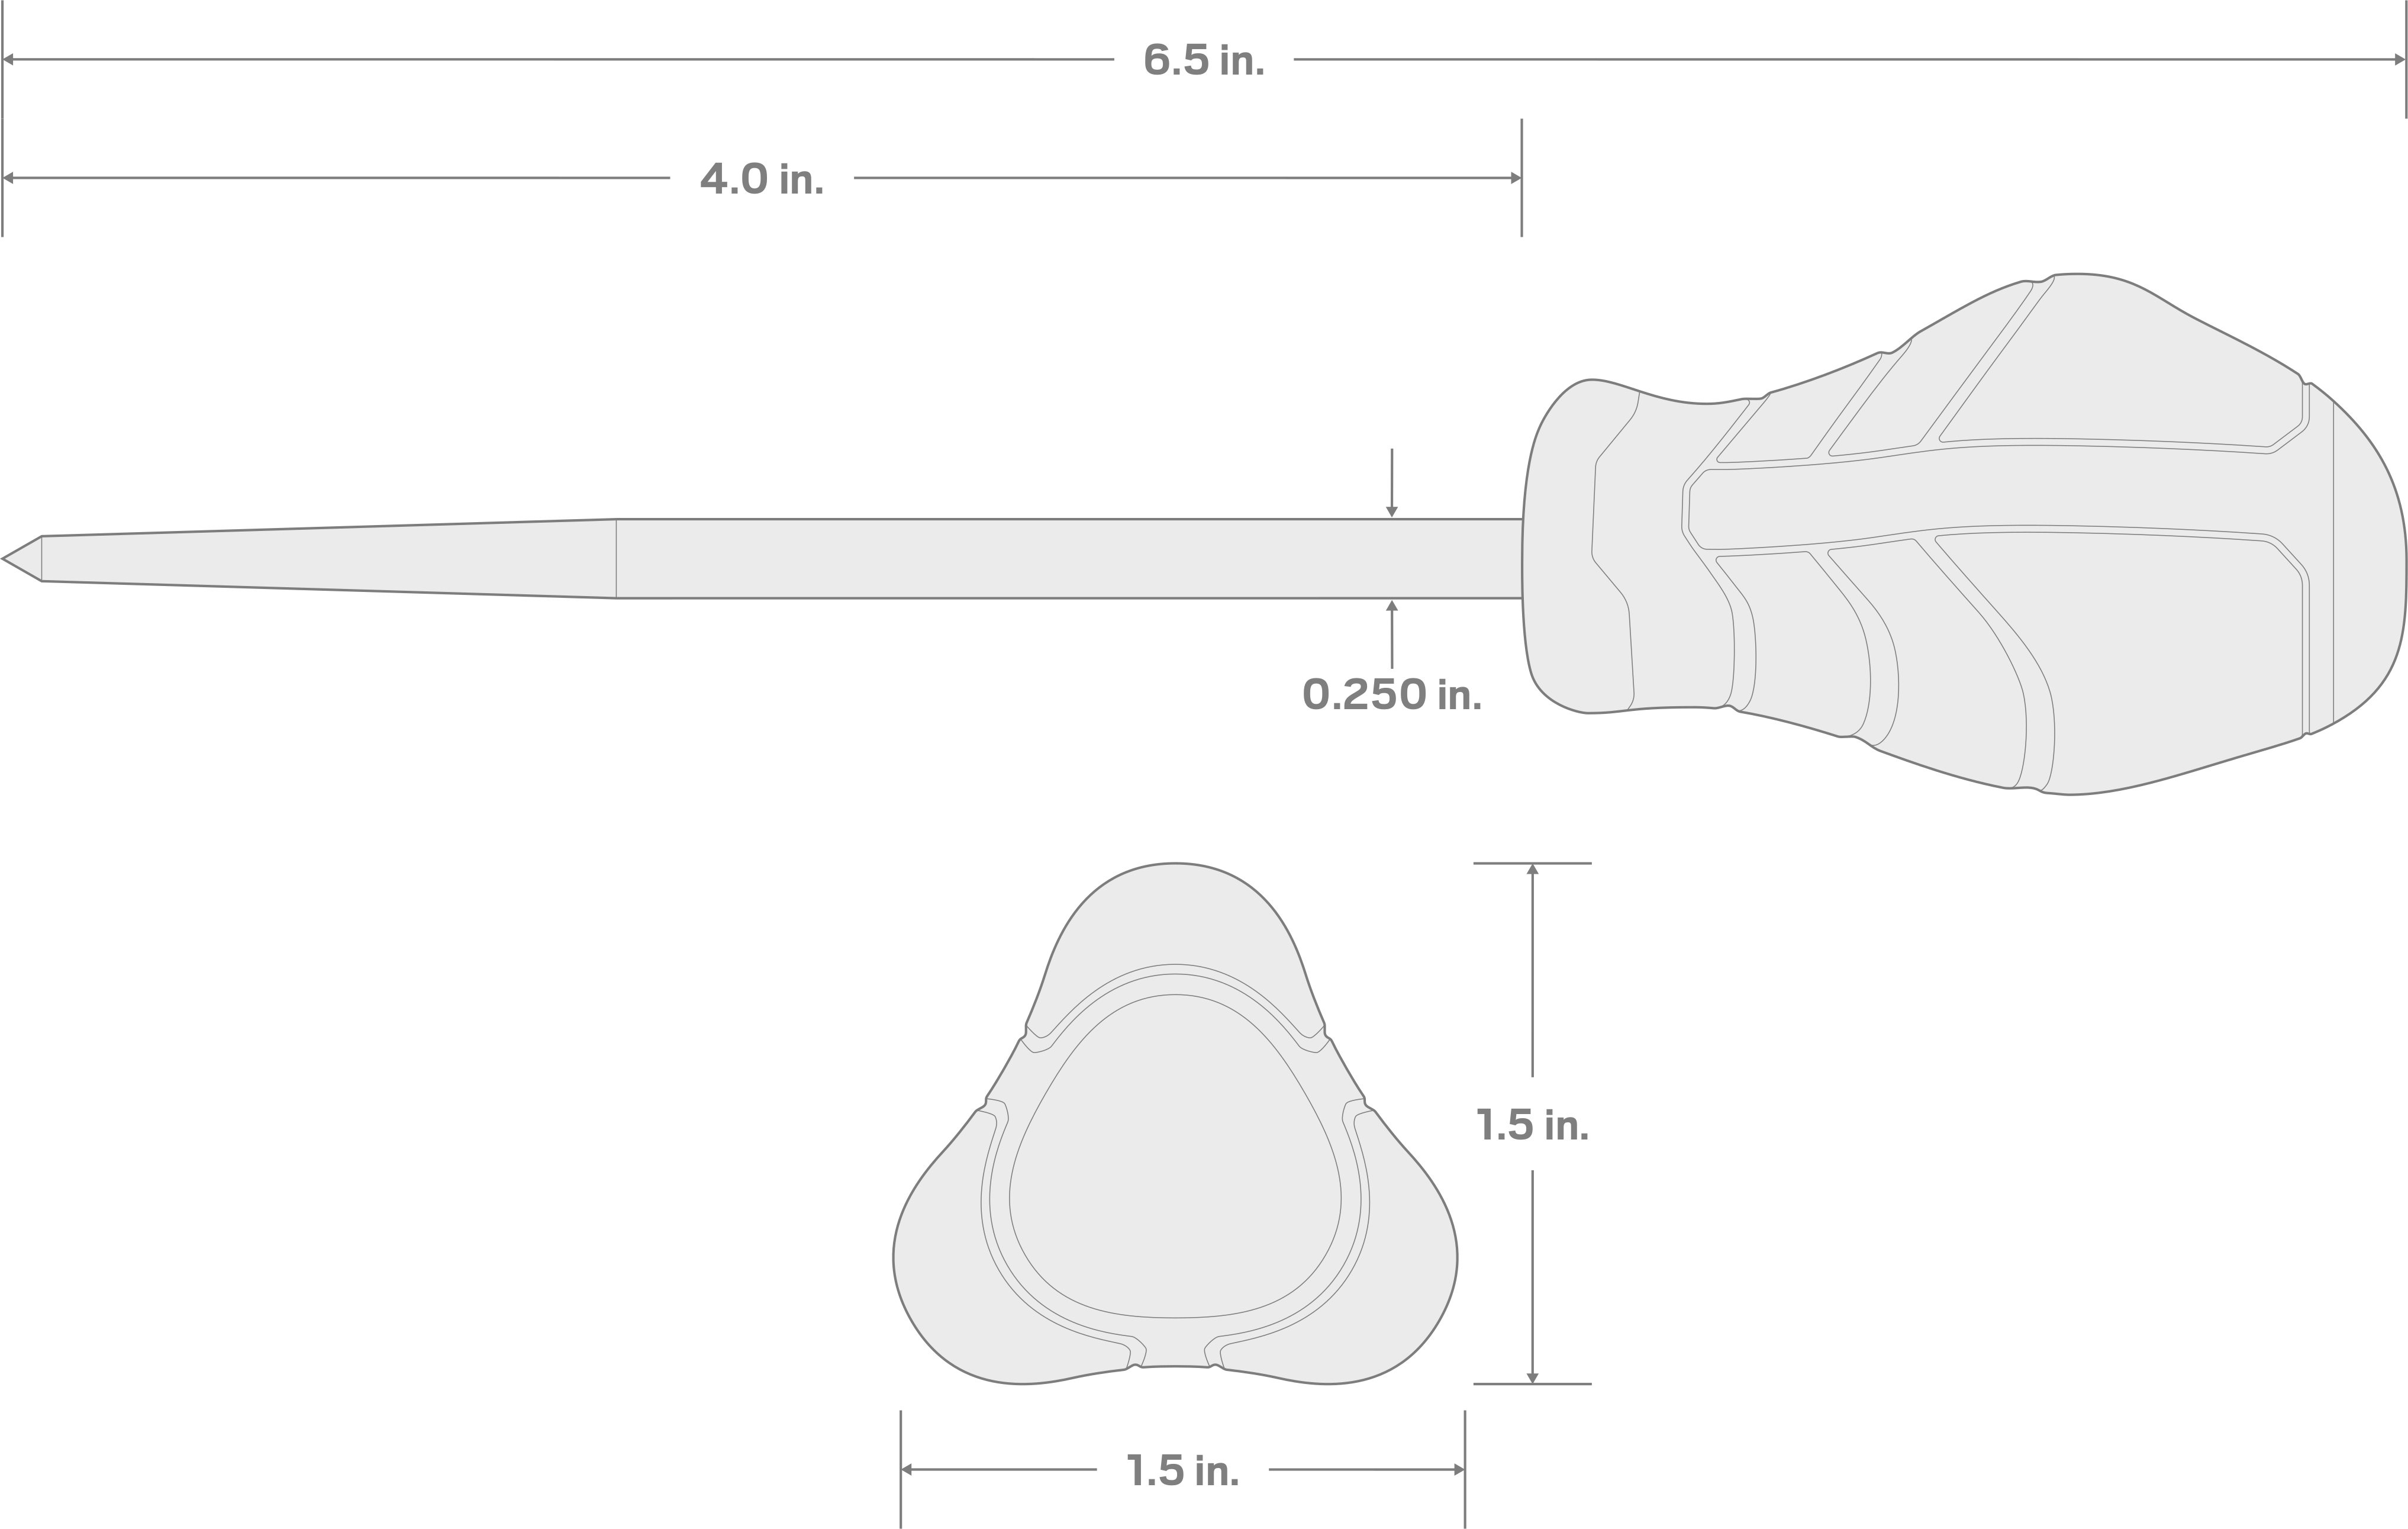 Specs for Scratch and Punch Awl with High-Torque Handle